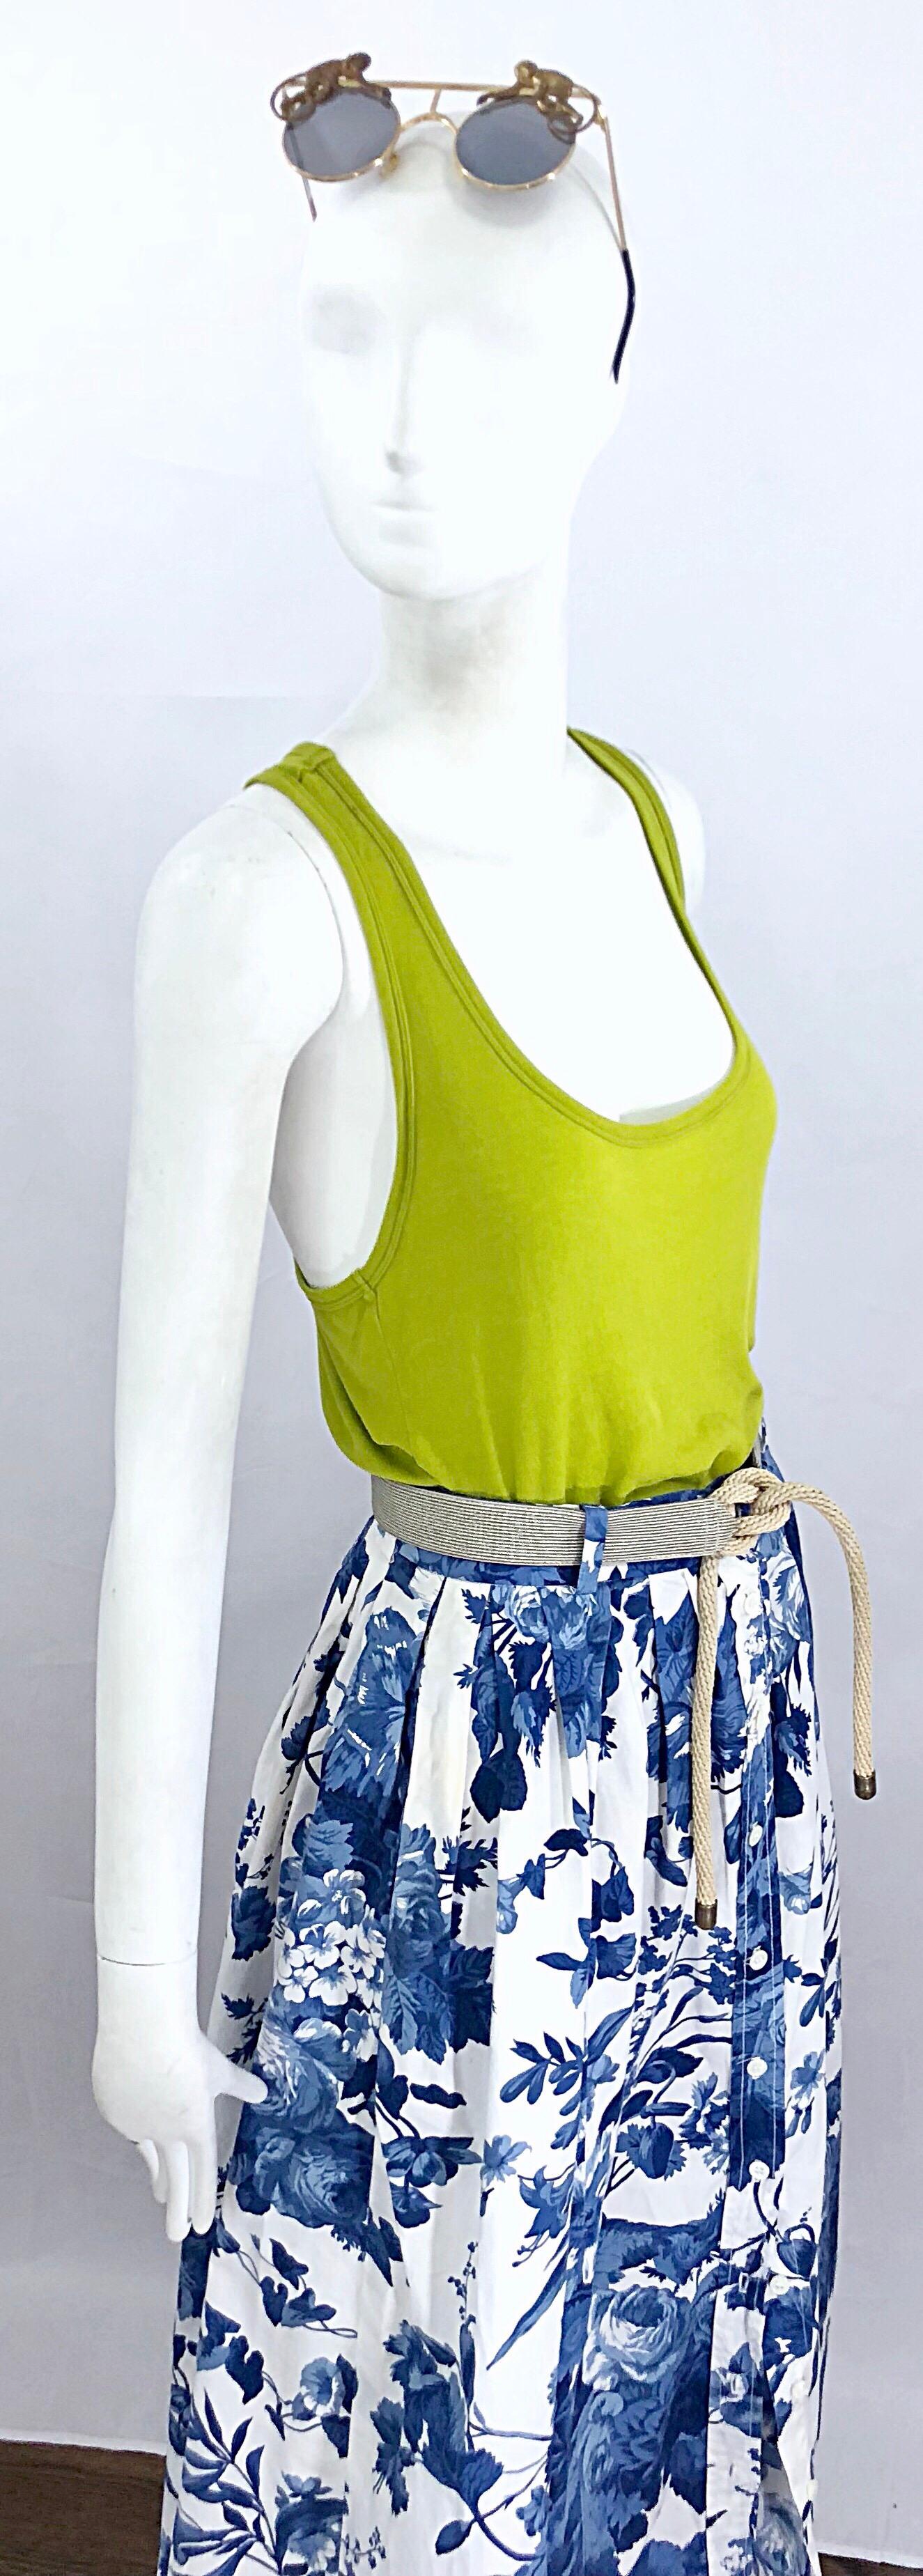 chartreuse camisole